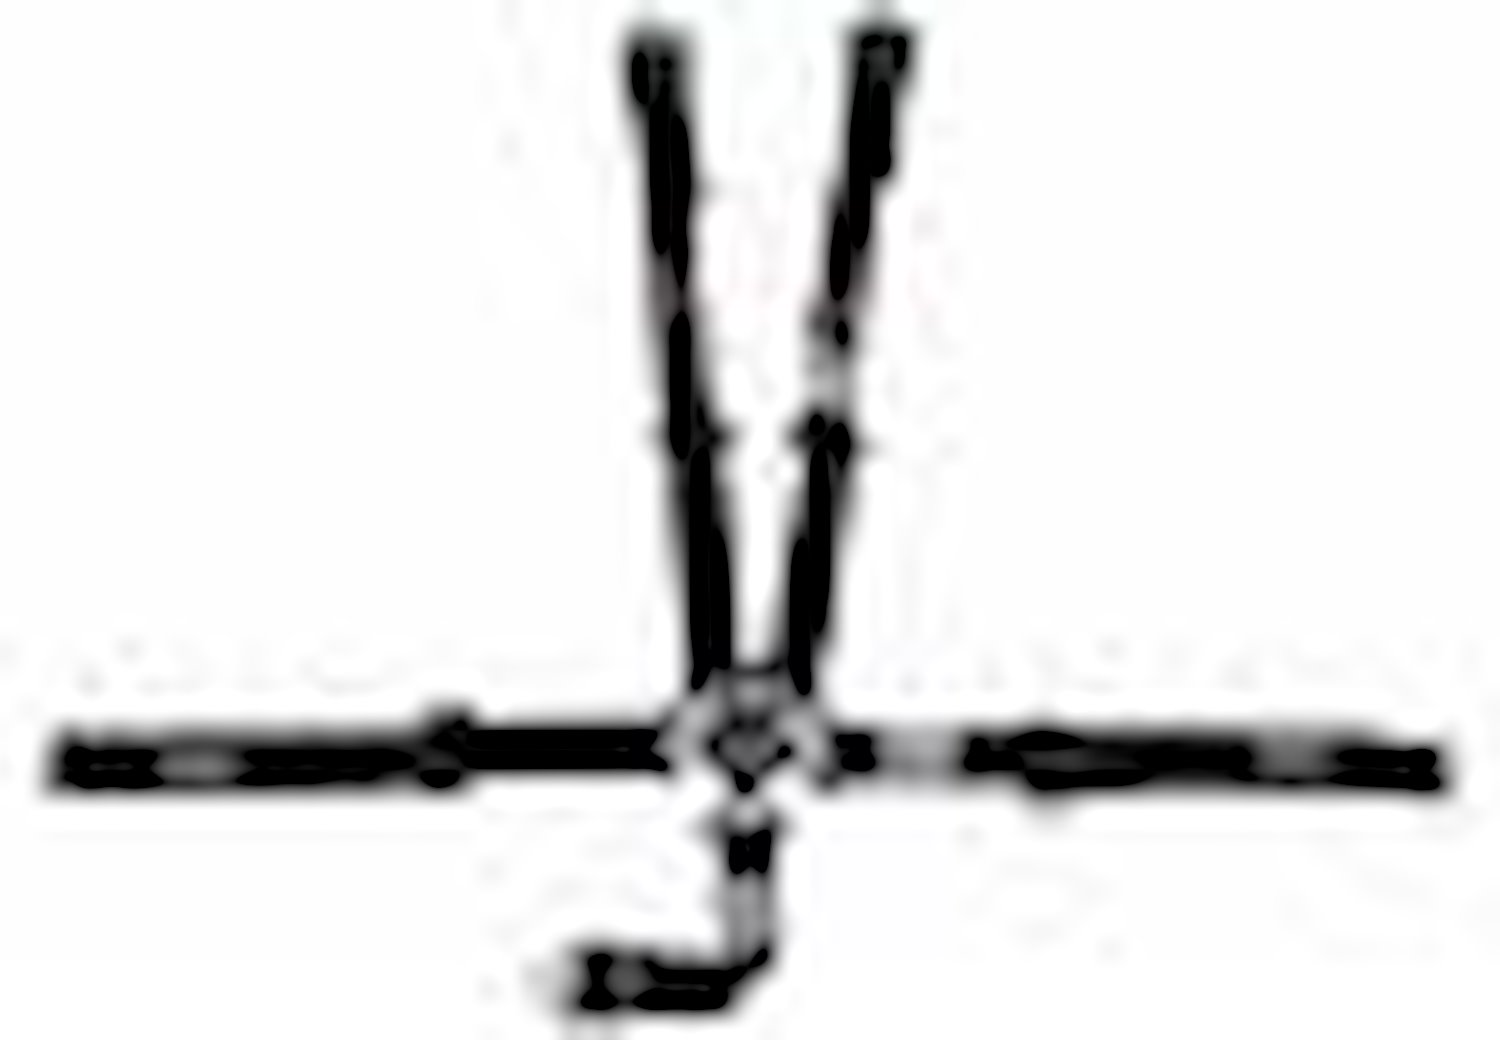 SFI 16.1 CAM-LOCK HARNESS 2 PULL DOWN Lap Belt 2 Shoulder Harness Individual ROLL BAR Mount 2 DOUBLE